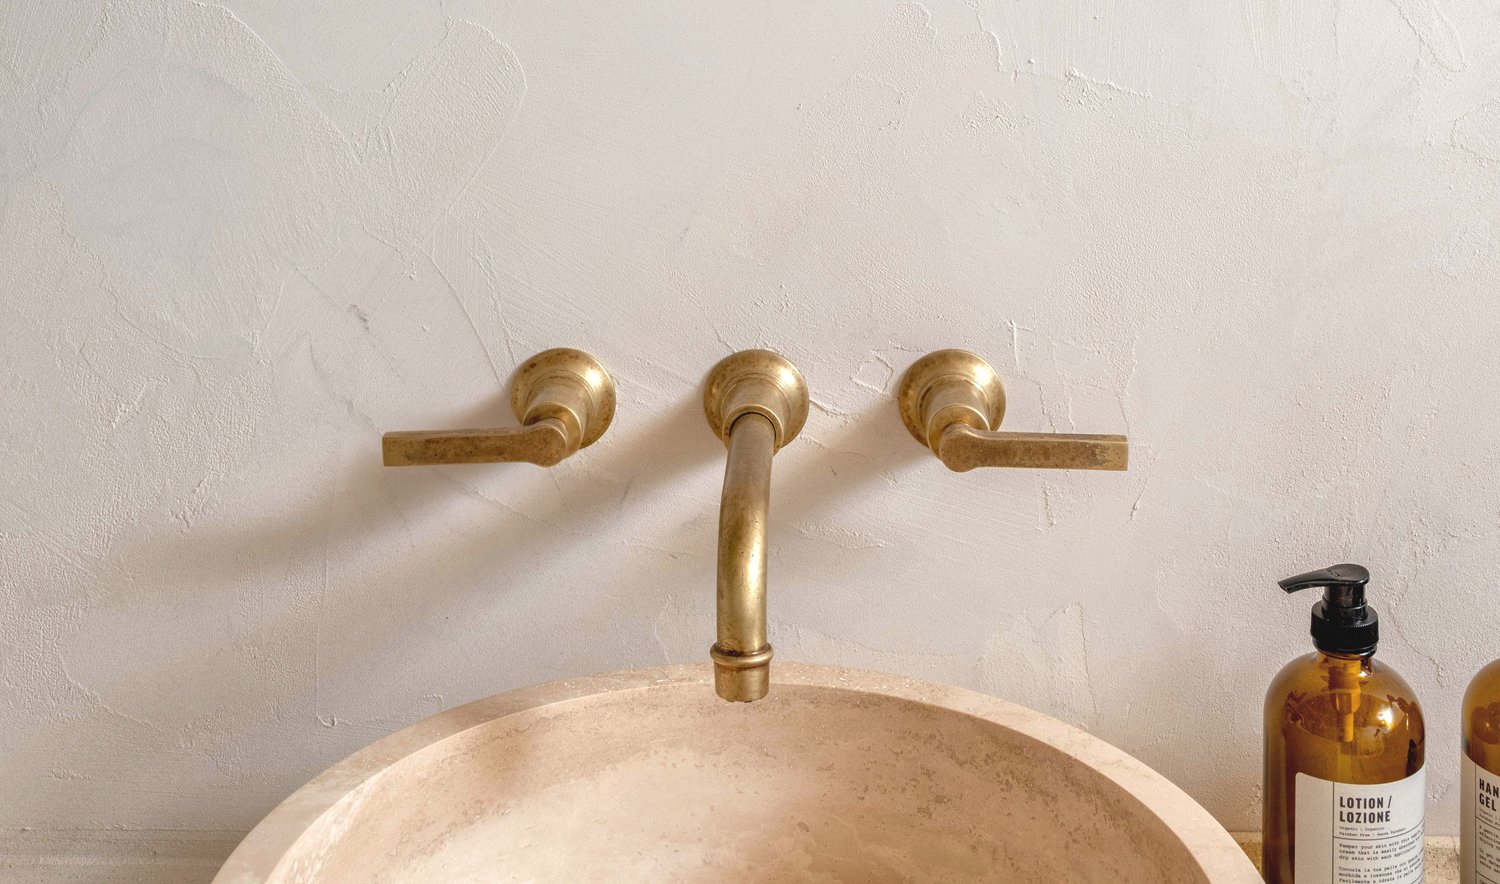 How To Install Wall Mount Faucet